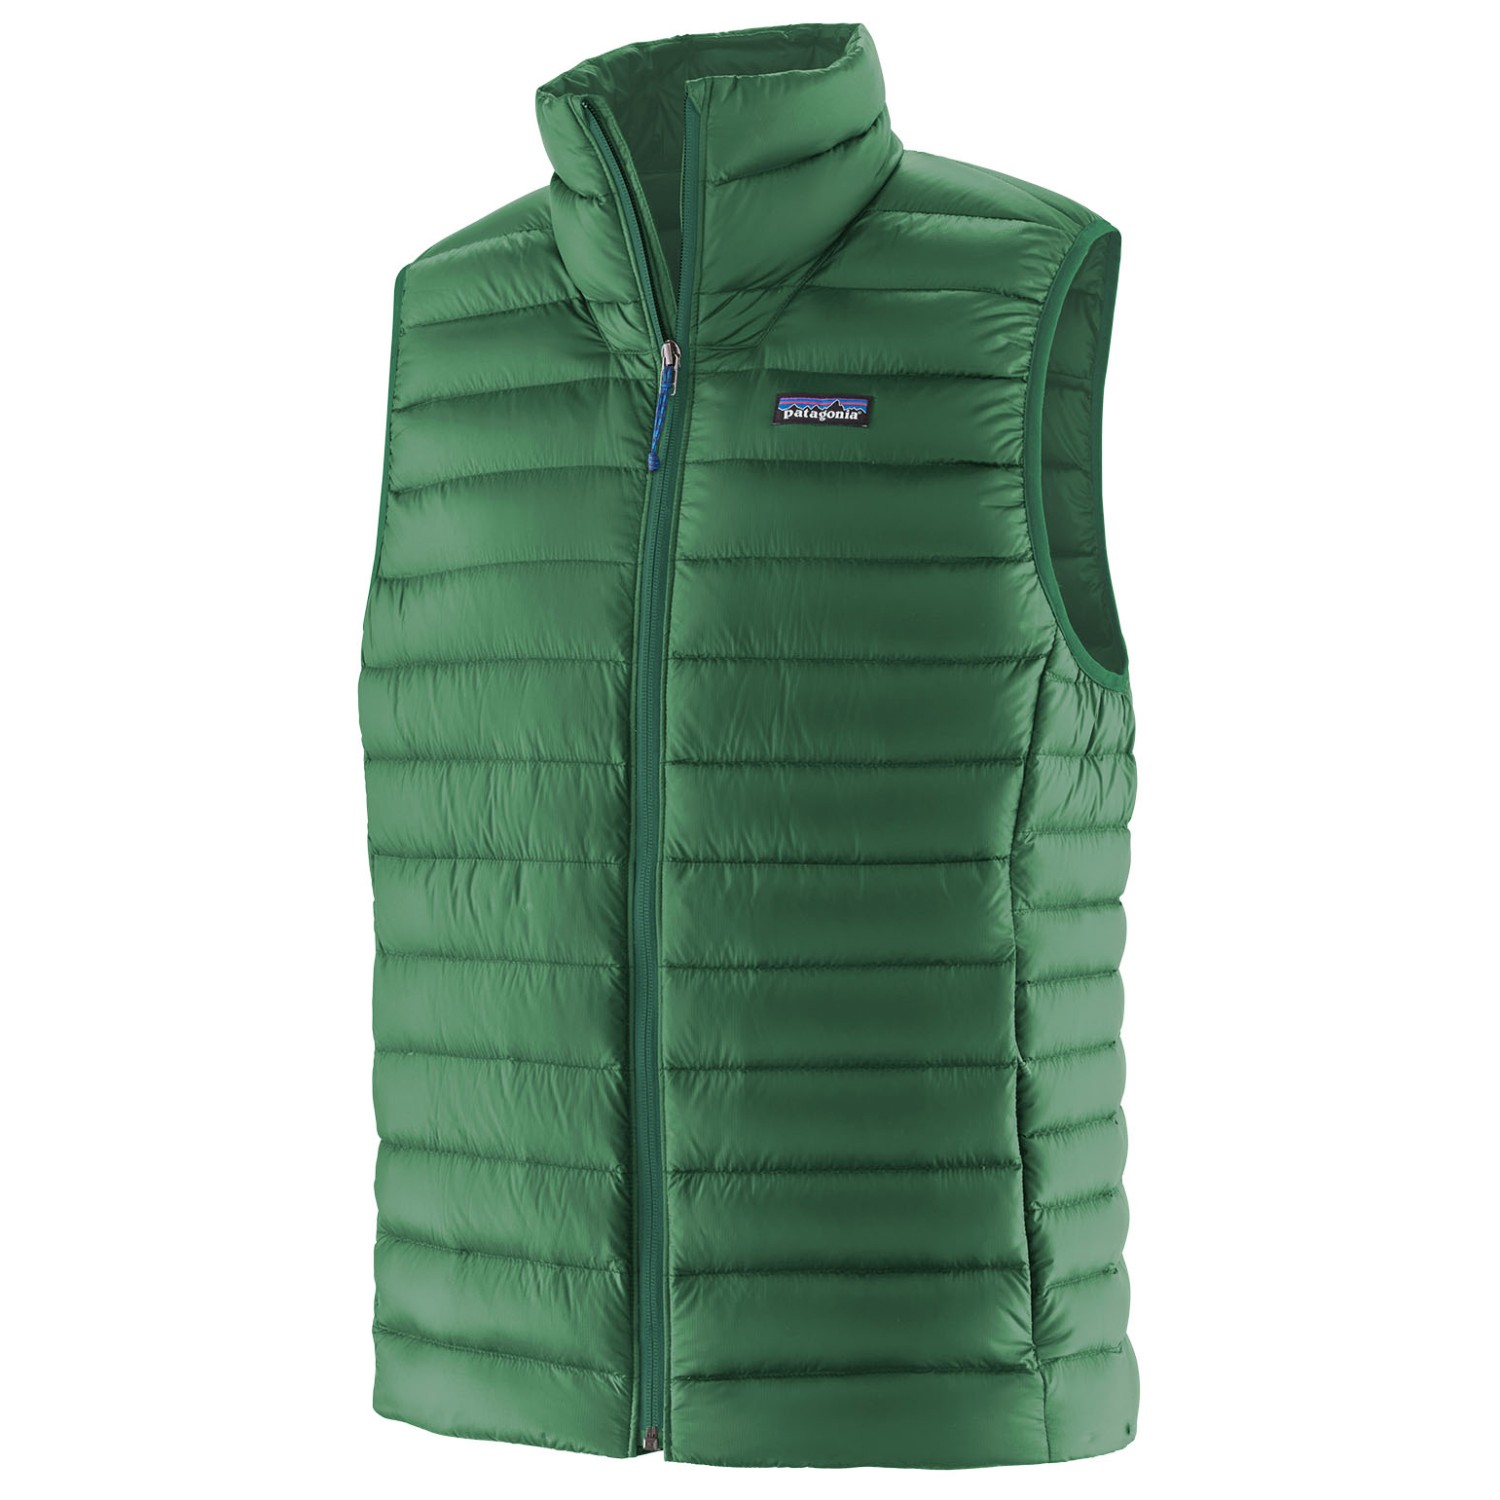 Жилет Patagonia Down Vest, цвет Gather Green mens wool sweater vest slim fit sweater vests knitted tank top sleeveless pullover striped tops solid color business vest